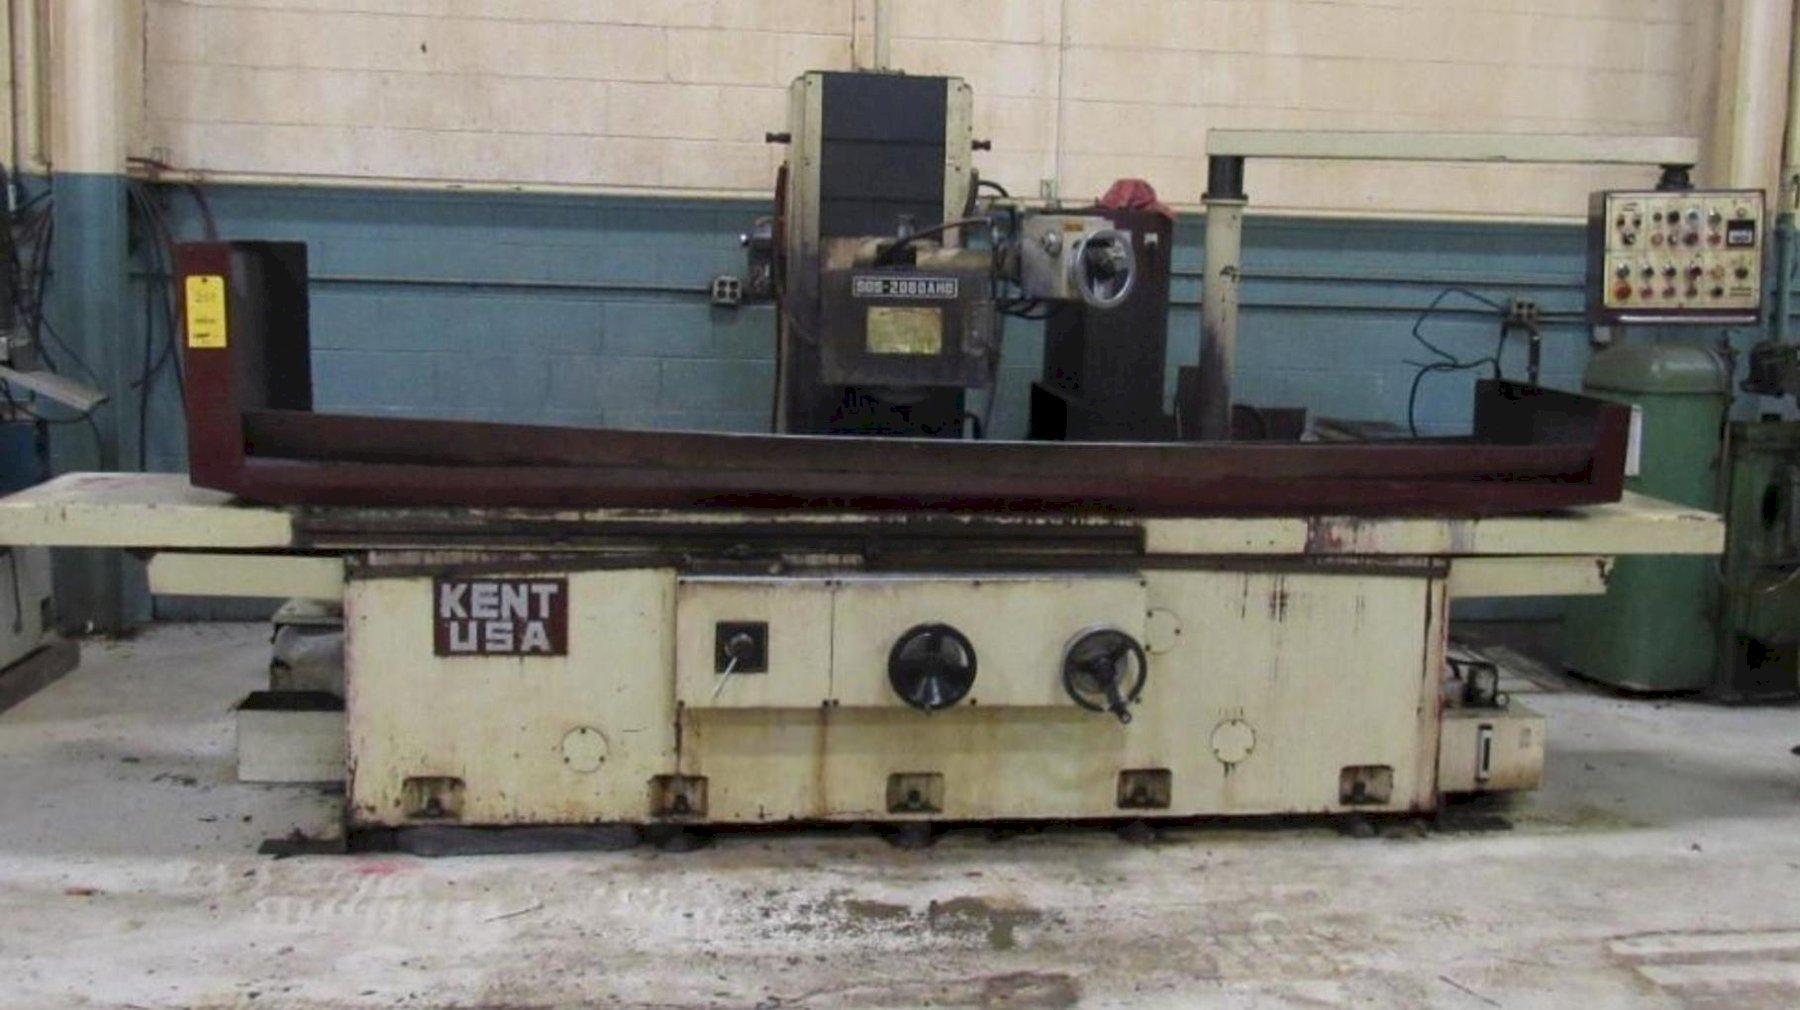 20" X 60" KENT SGS-2060-AHC AUTOMATIC HYDRAULIC SURFACE GRINDER. STOCK # 0524623.